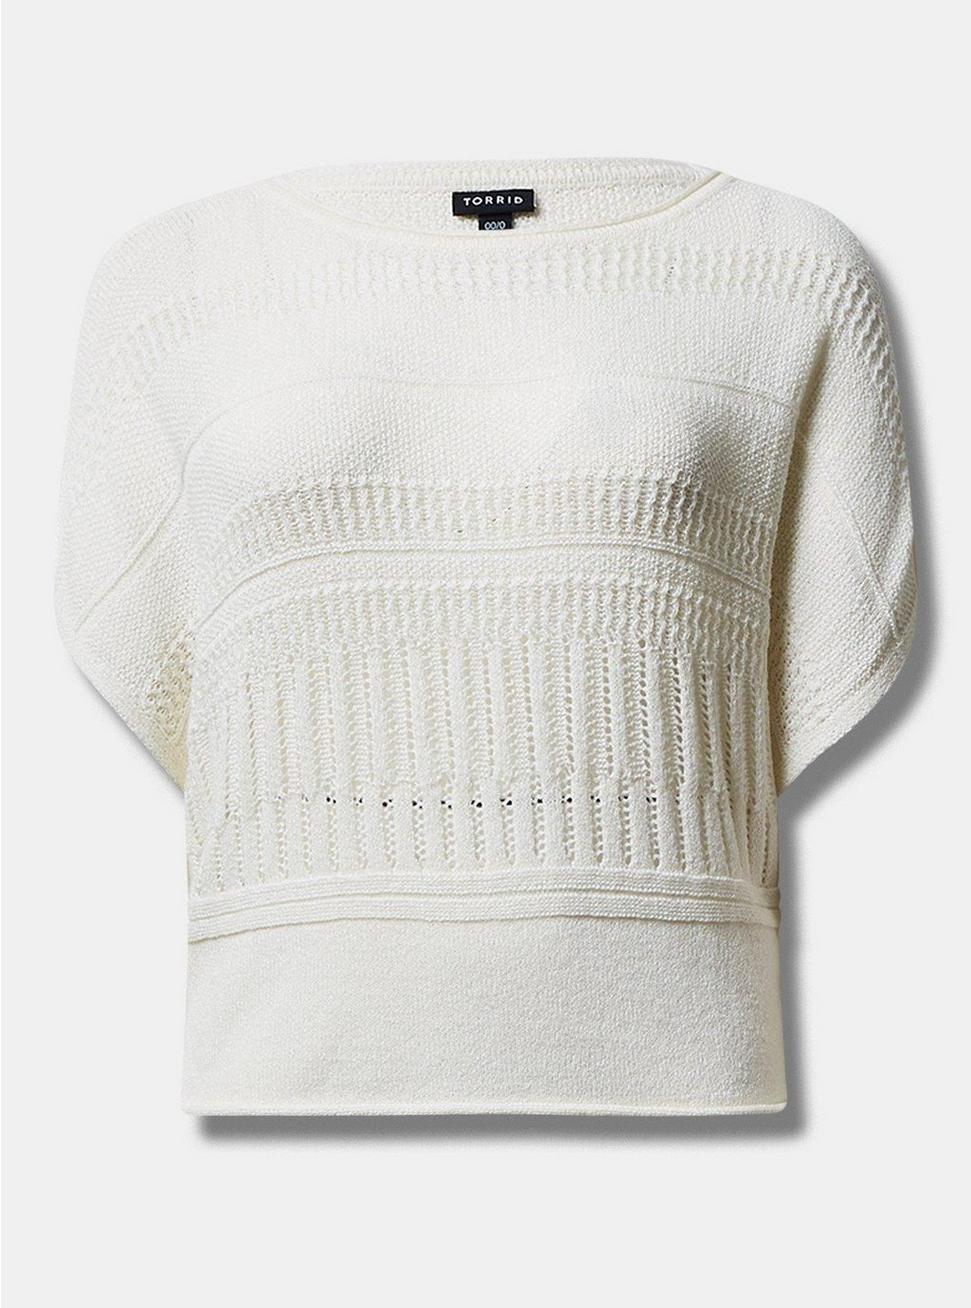 Pointelle Boat Neck Boxy Cropped Sweater, PRISTINE, hi-res